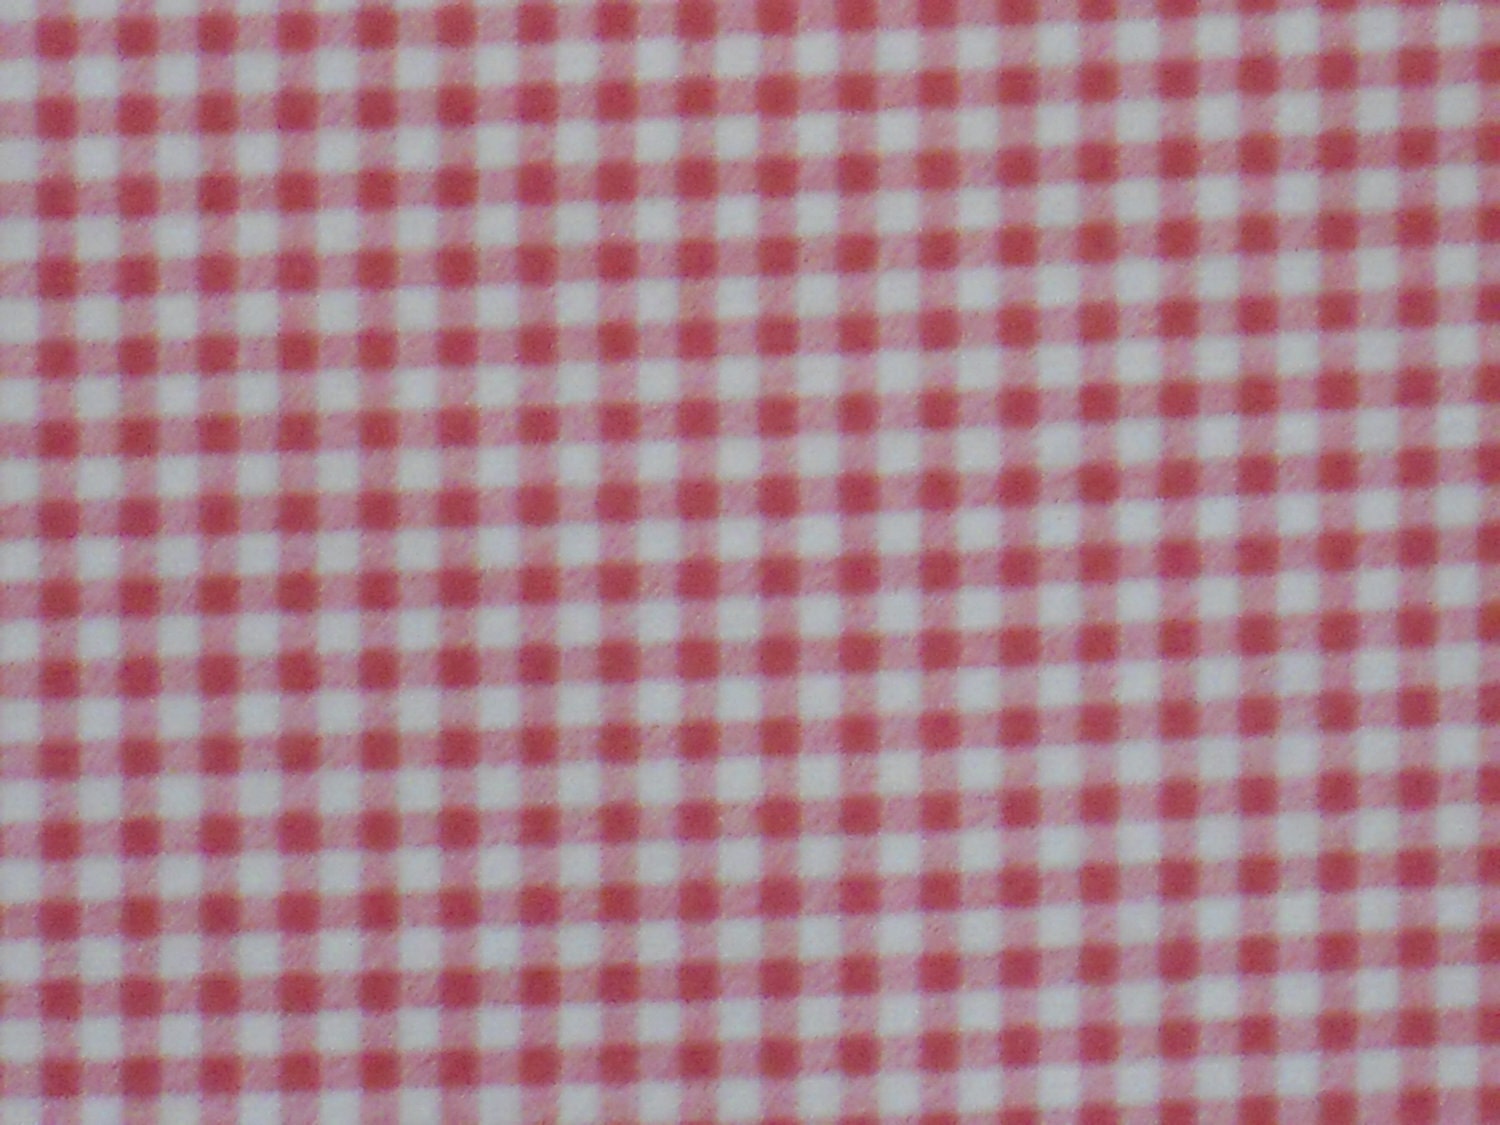 Pink and White Check Fabric Gingham Cheerful by PernaManufacturing